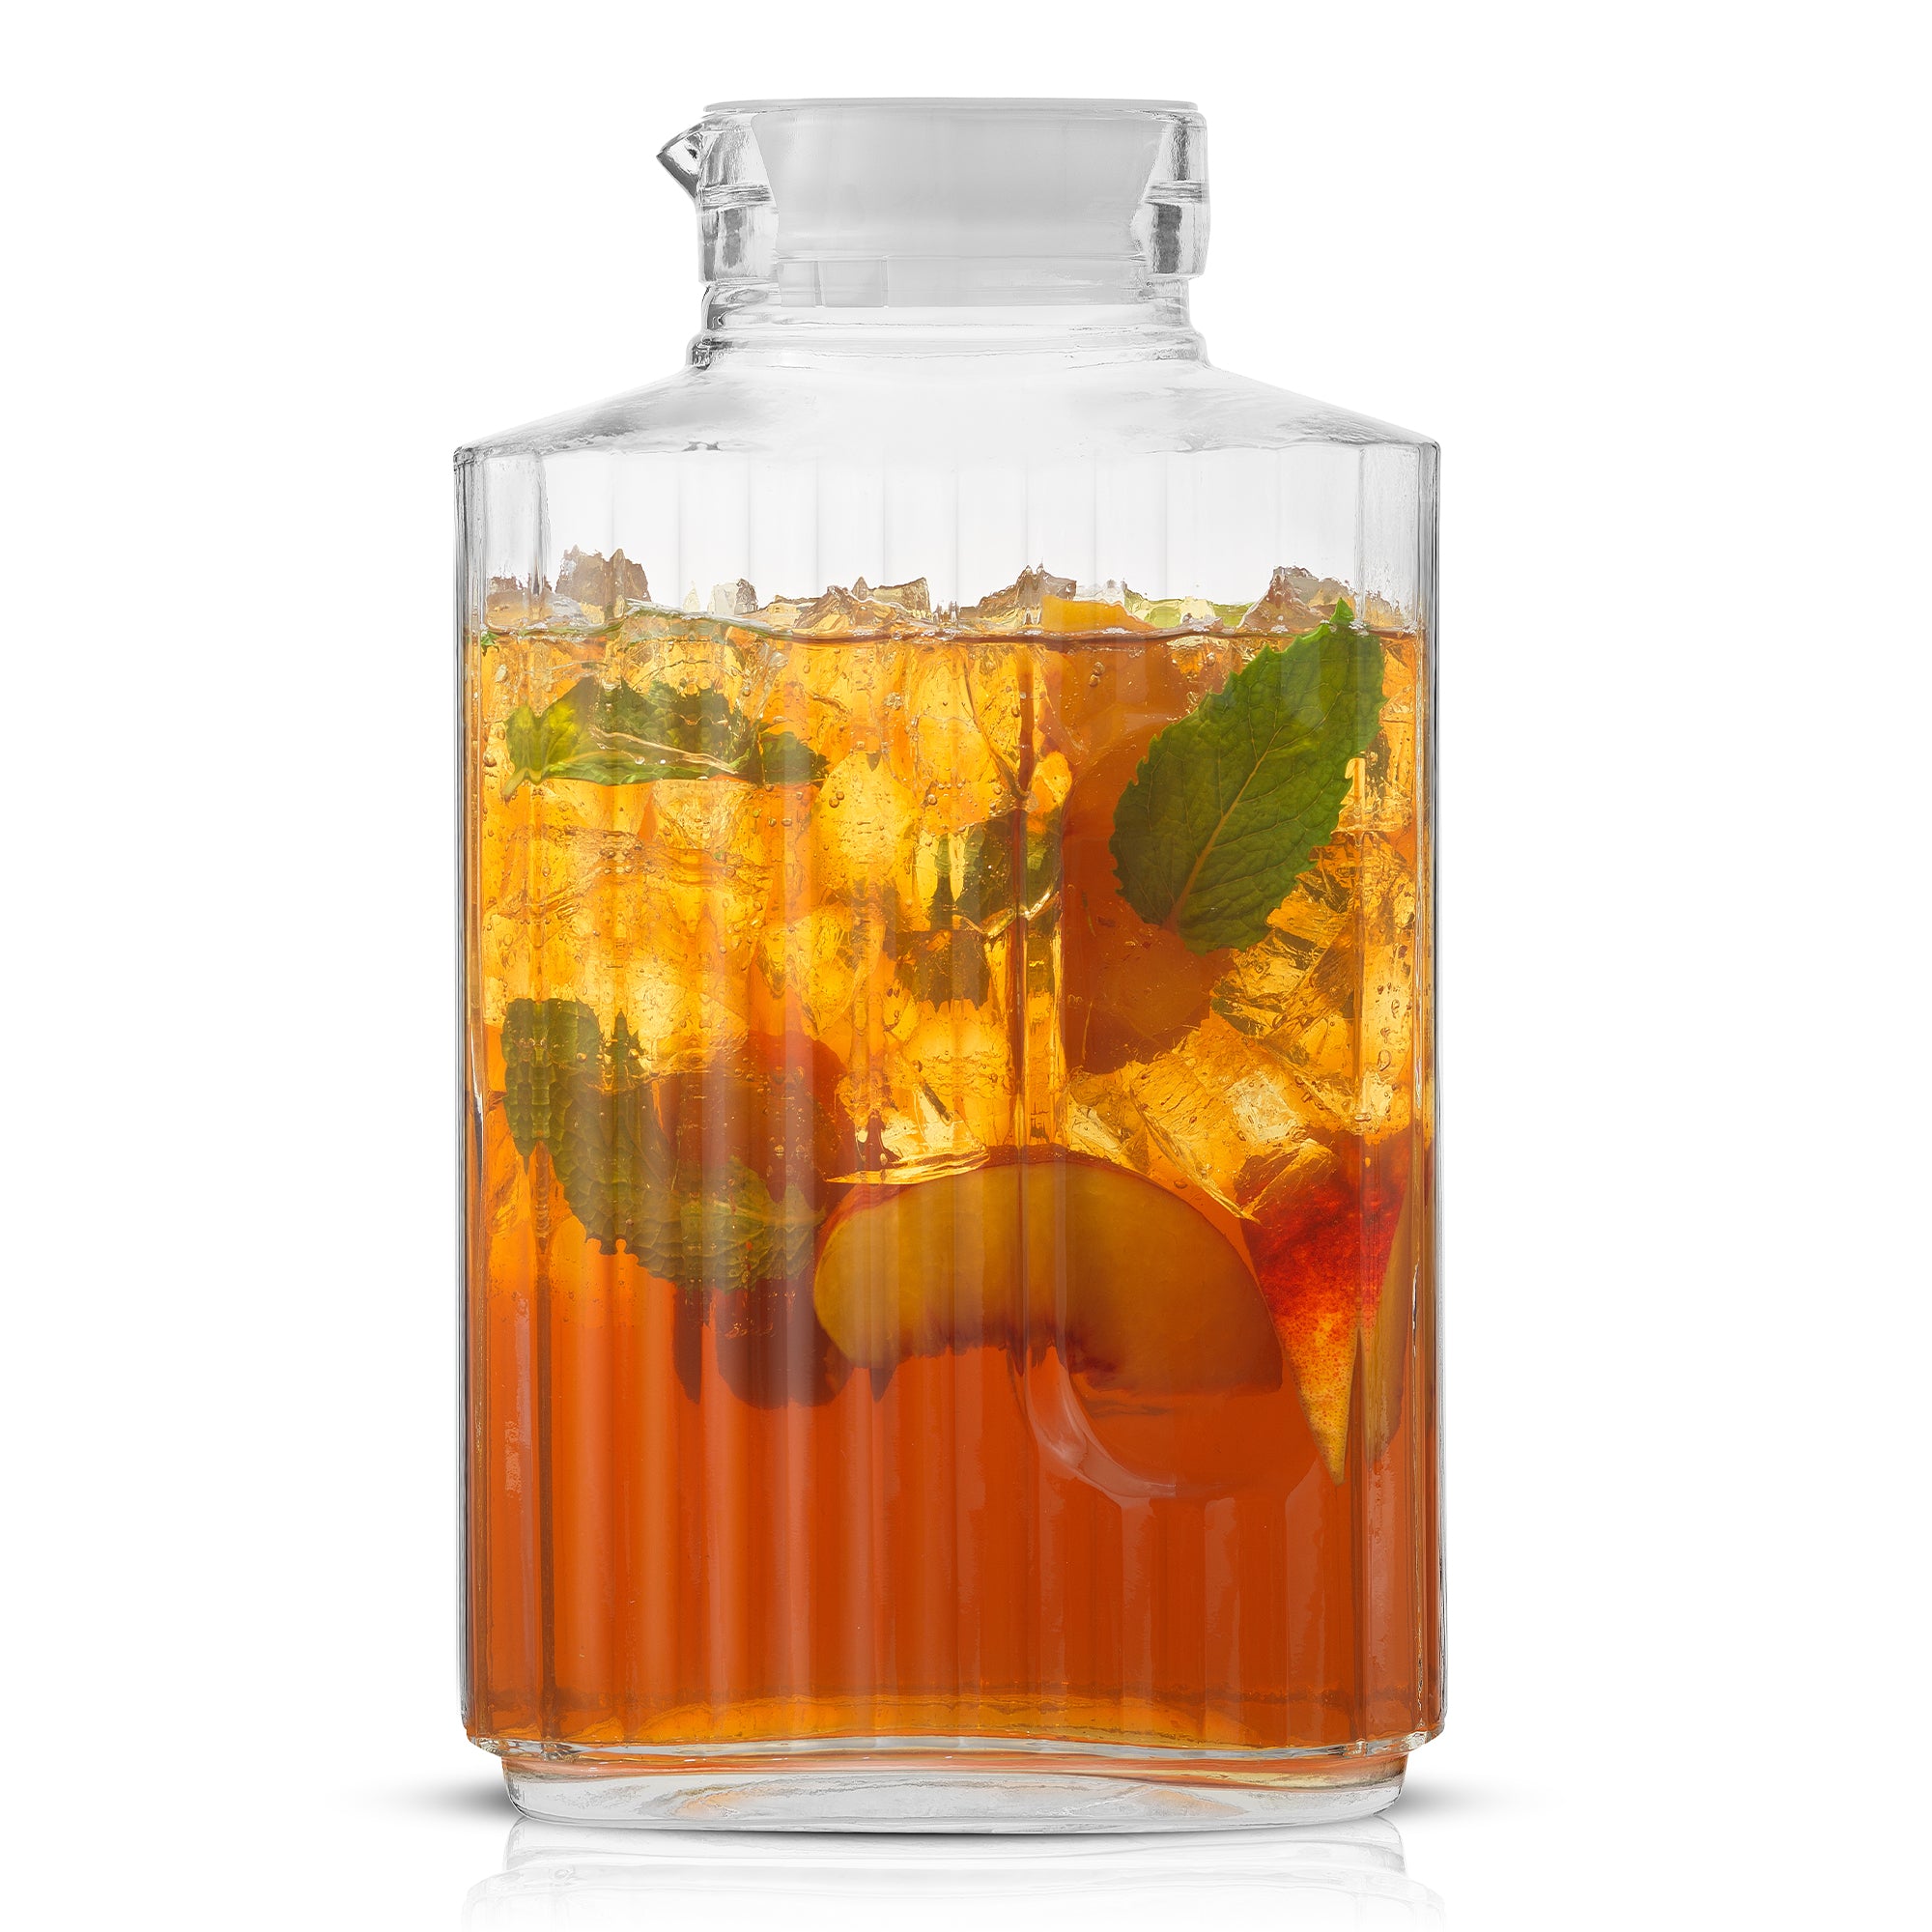 A clear JoyJolt Beverage Serveware Glass Pitcher filled with iced tea and mint leaves sits on a white background. The pitcher has a spout for pouring. Slices of peach in the tea with ice cubes.